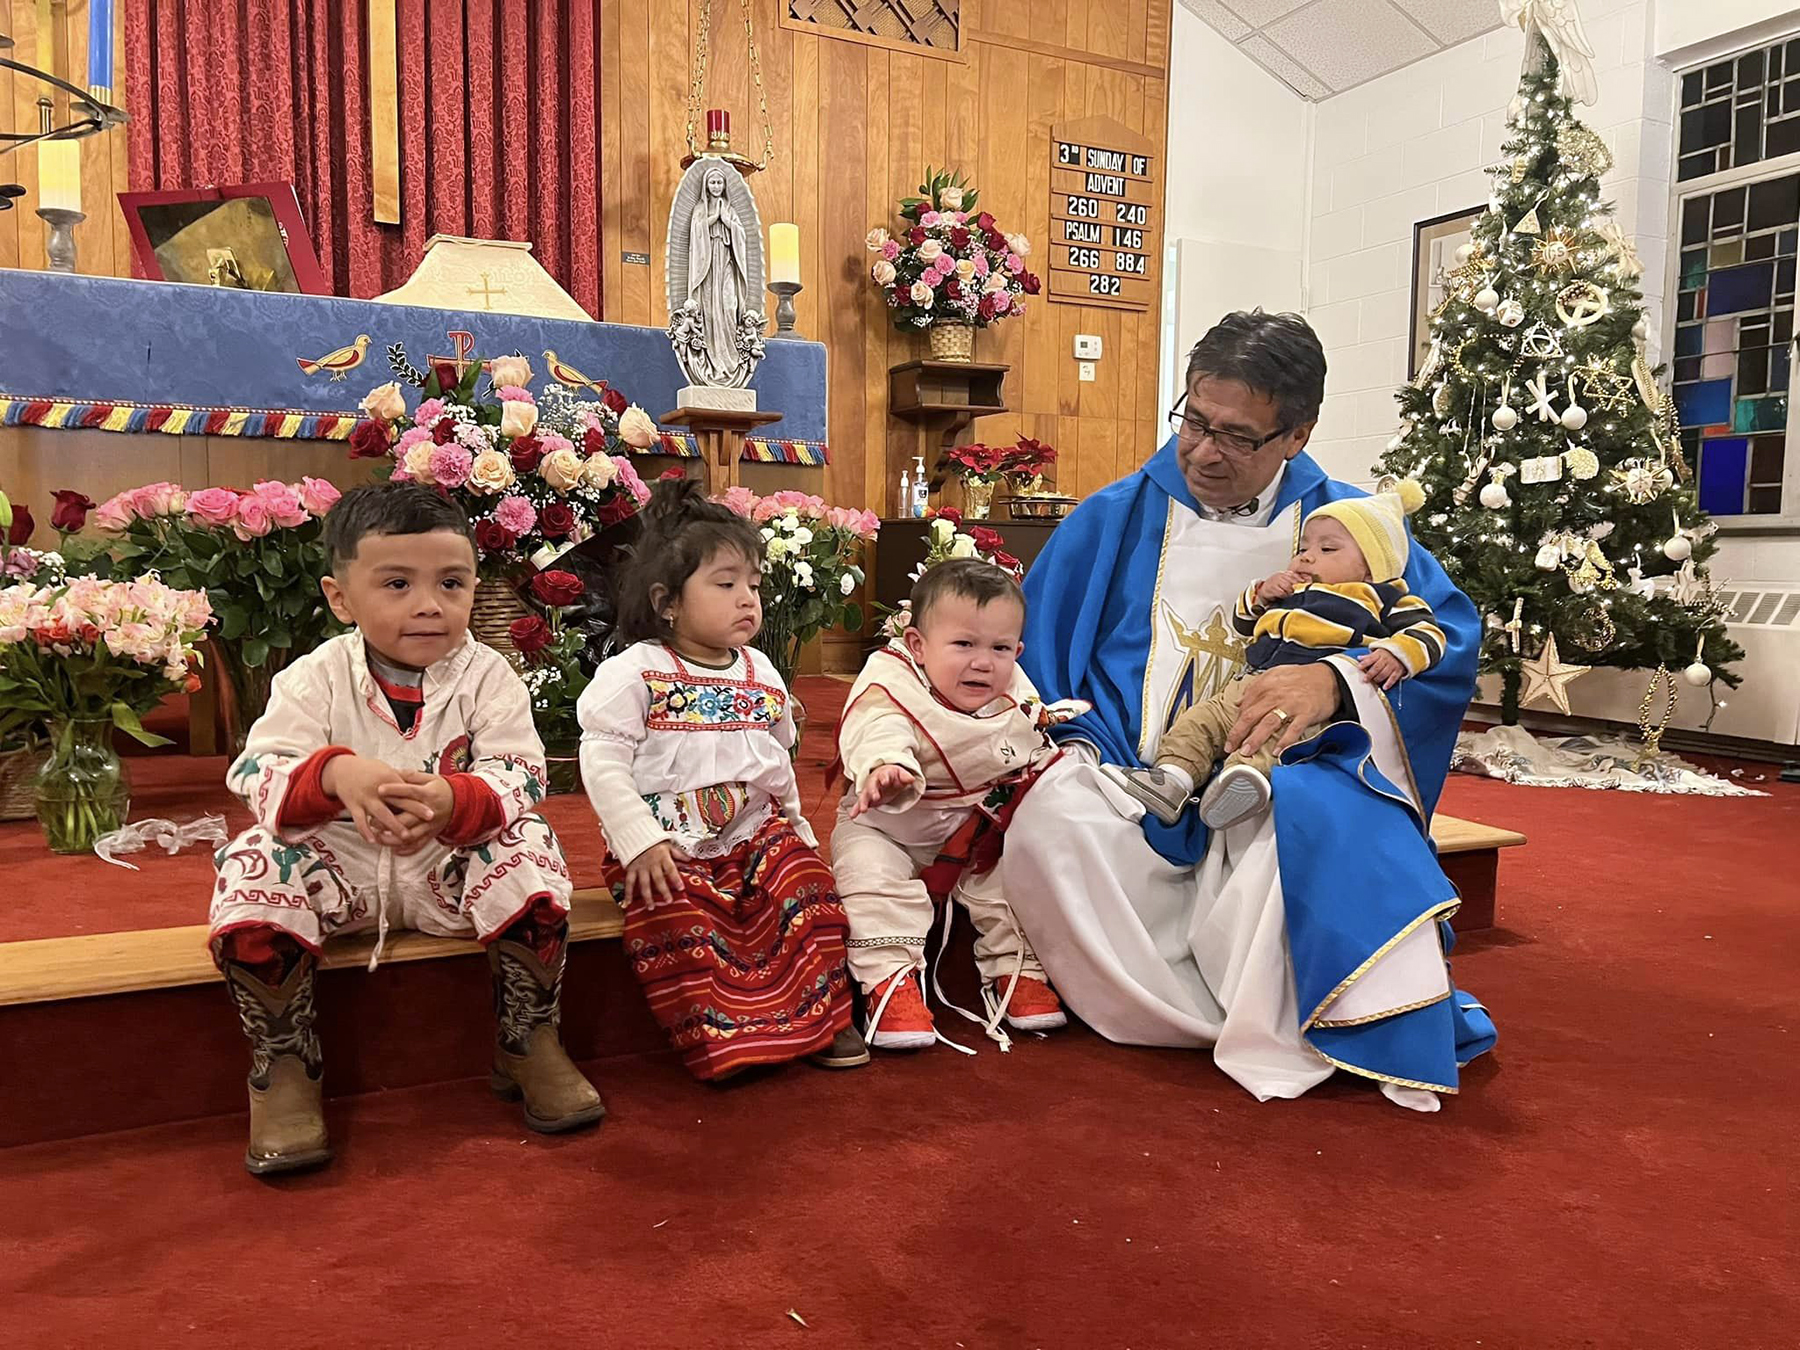 web-christs-beloved-community-winston-salem-feast-of-guadalupe-javier-arias-and-kids_727